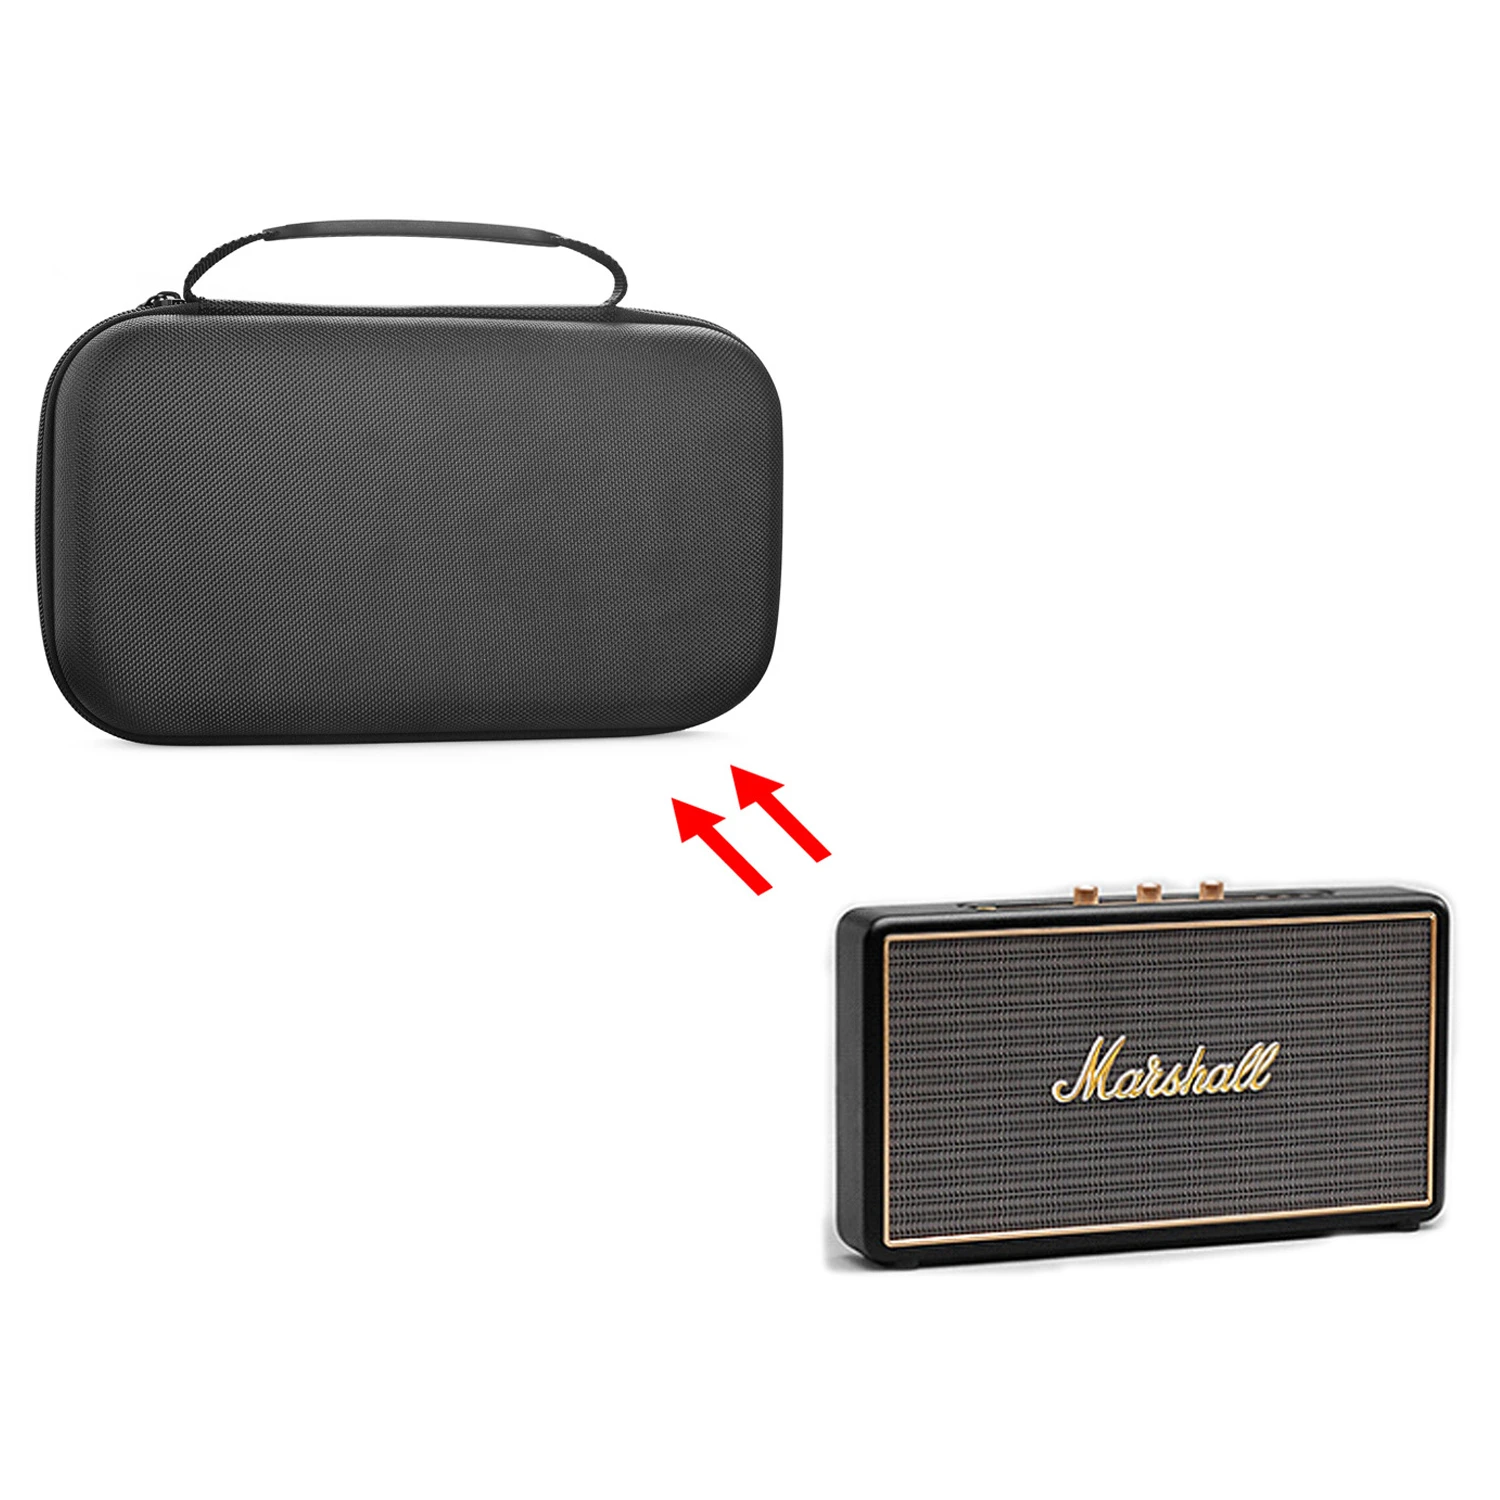 EVA Portable Protective Carrying Box Cover Storage Case Bag for MARSHALL  Stockwell Bluetooth Speaker Accessories|Speaker Accessories| - AliExpress